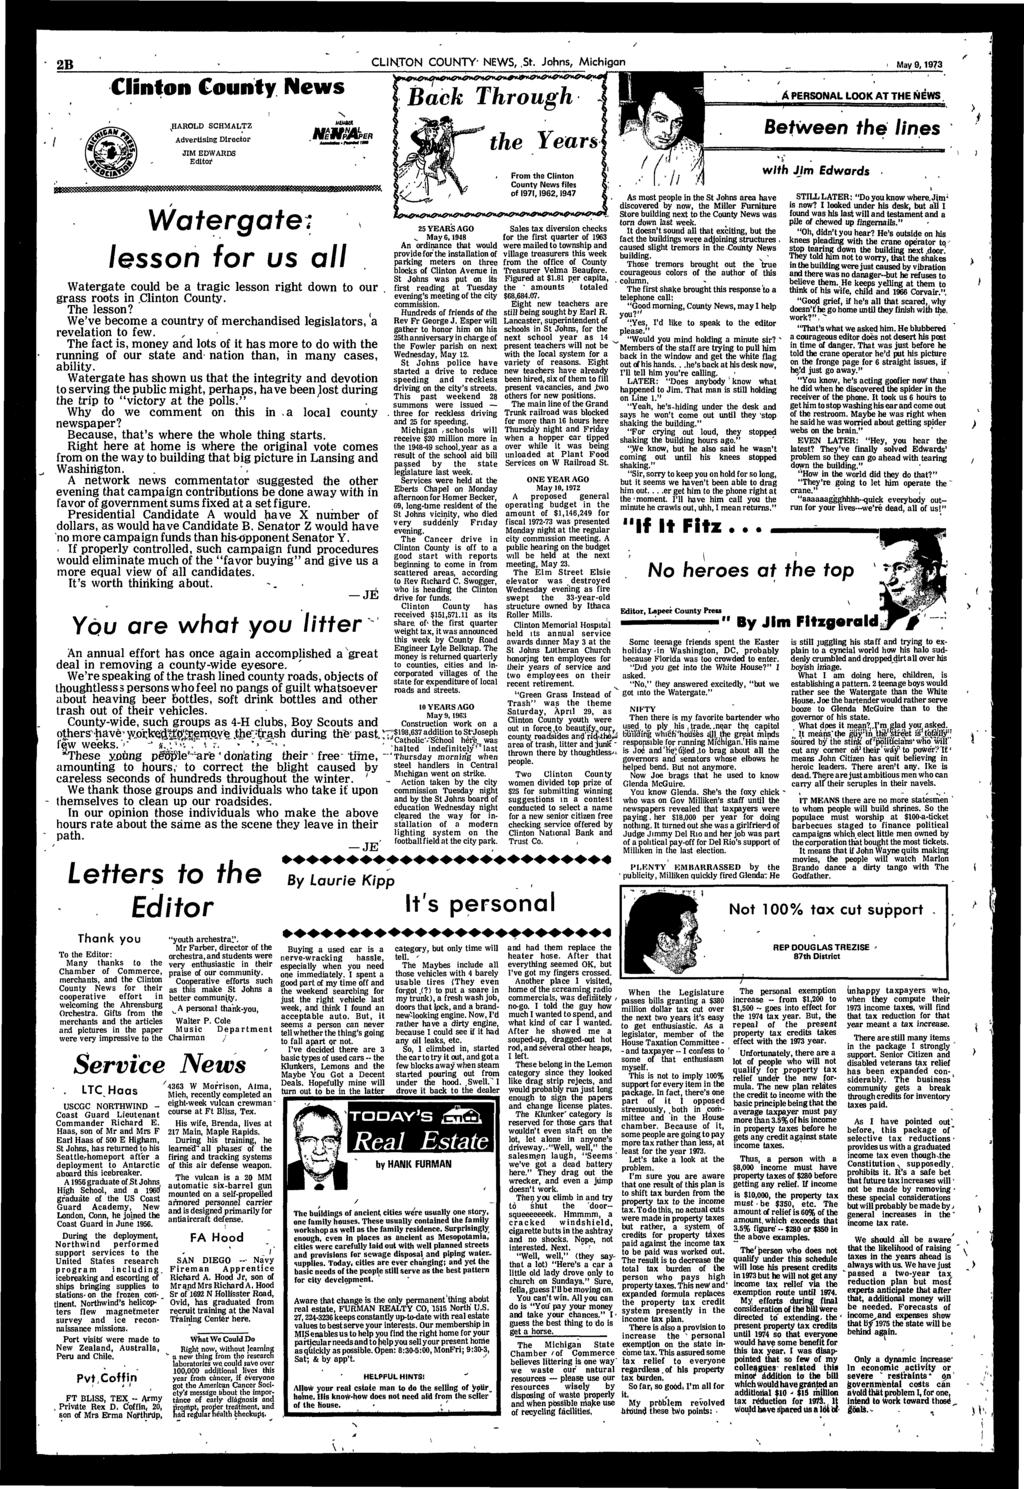 2B CLNTON COUNTY- NEWS,,St. Johns, Mchgan May 9,1973 Clnton County News A PERSONAL LOOK AT THE NEWS.